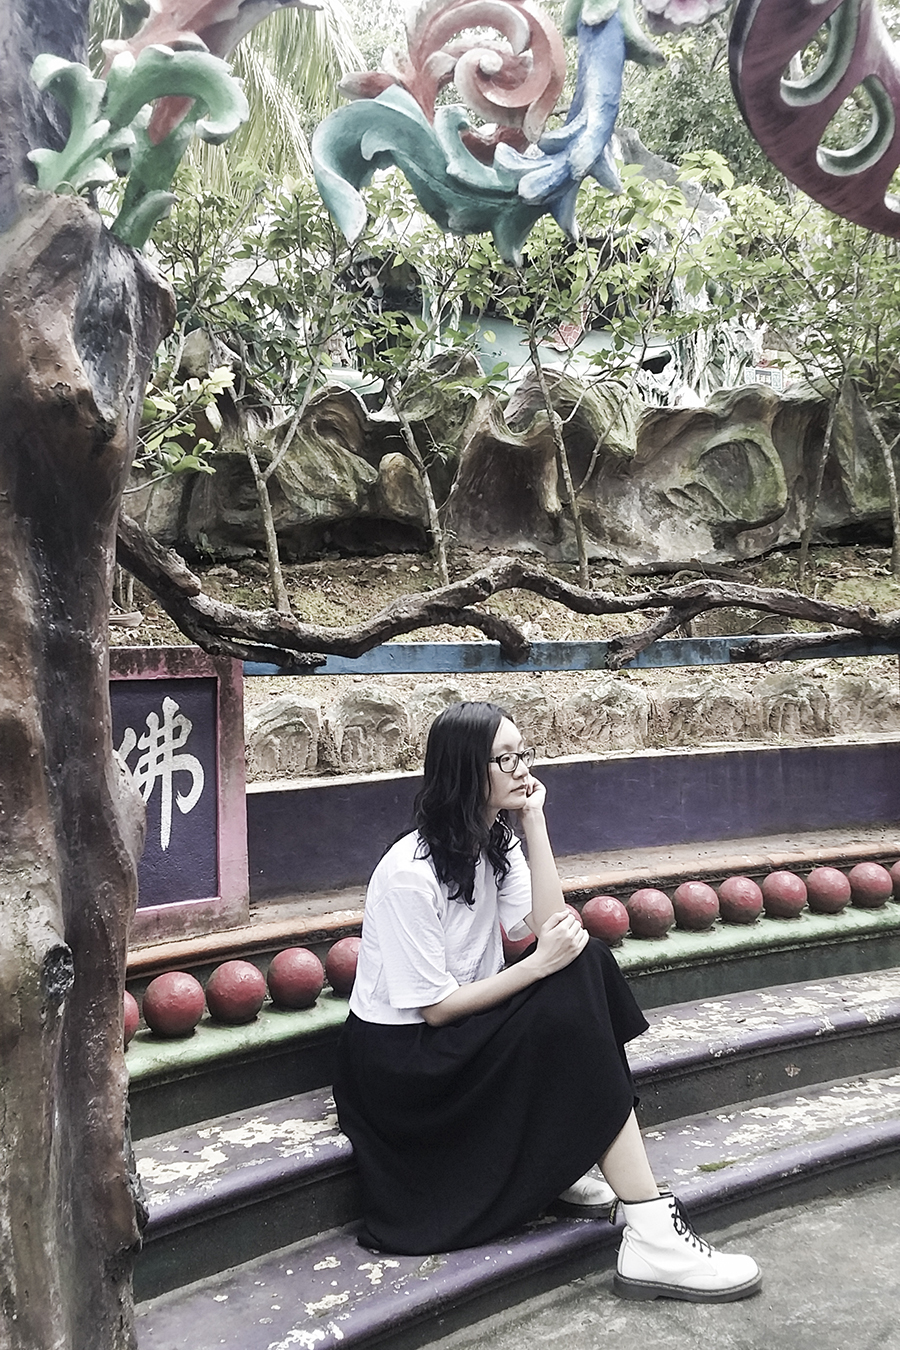 OOTD at Haw Par Villa, Singapore. Wearing white textured crop top from Bec & Bridge, black midi skirt from Lowry's Farm, white 1460 8-eye boots from Dr. Martens, black frame glasses from Gap.